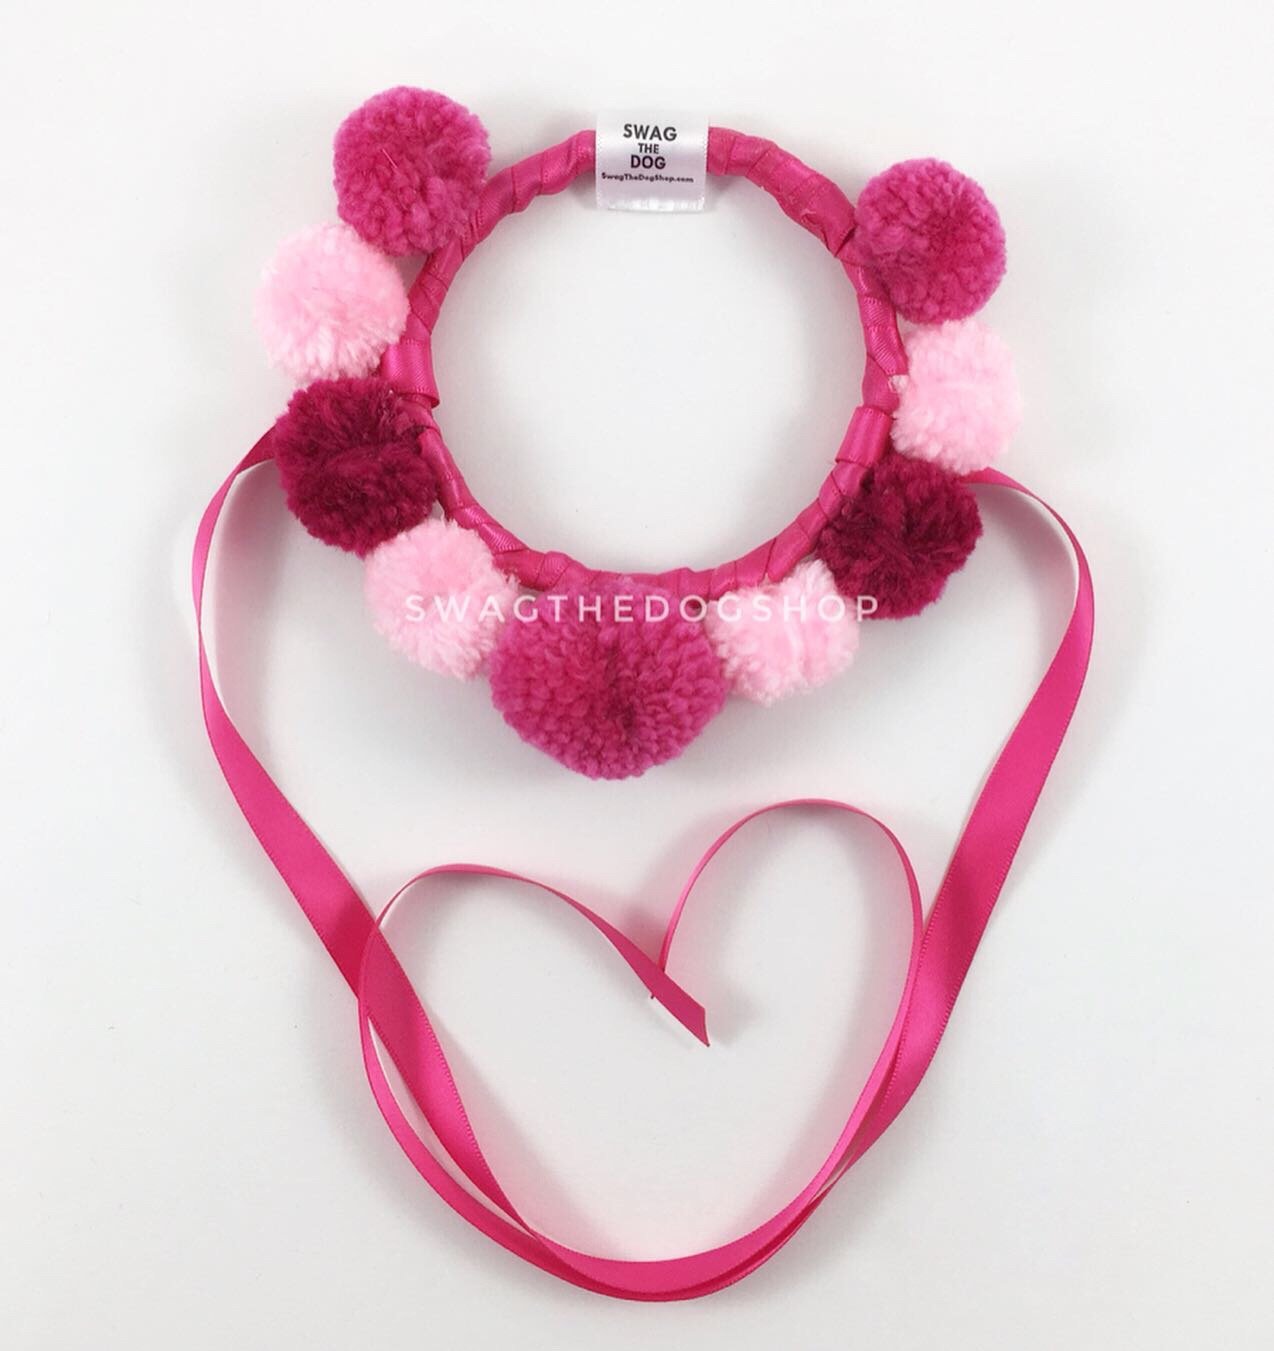 Heart Pomping Swag Crown with Pink Ribbon to tie. Mix of light pink pom poms and dark pink pom poms on crown. Dog Pom Pom Crown. 